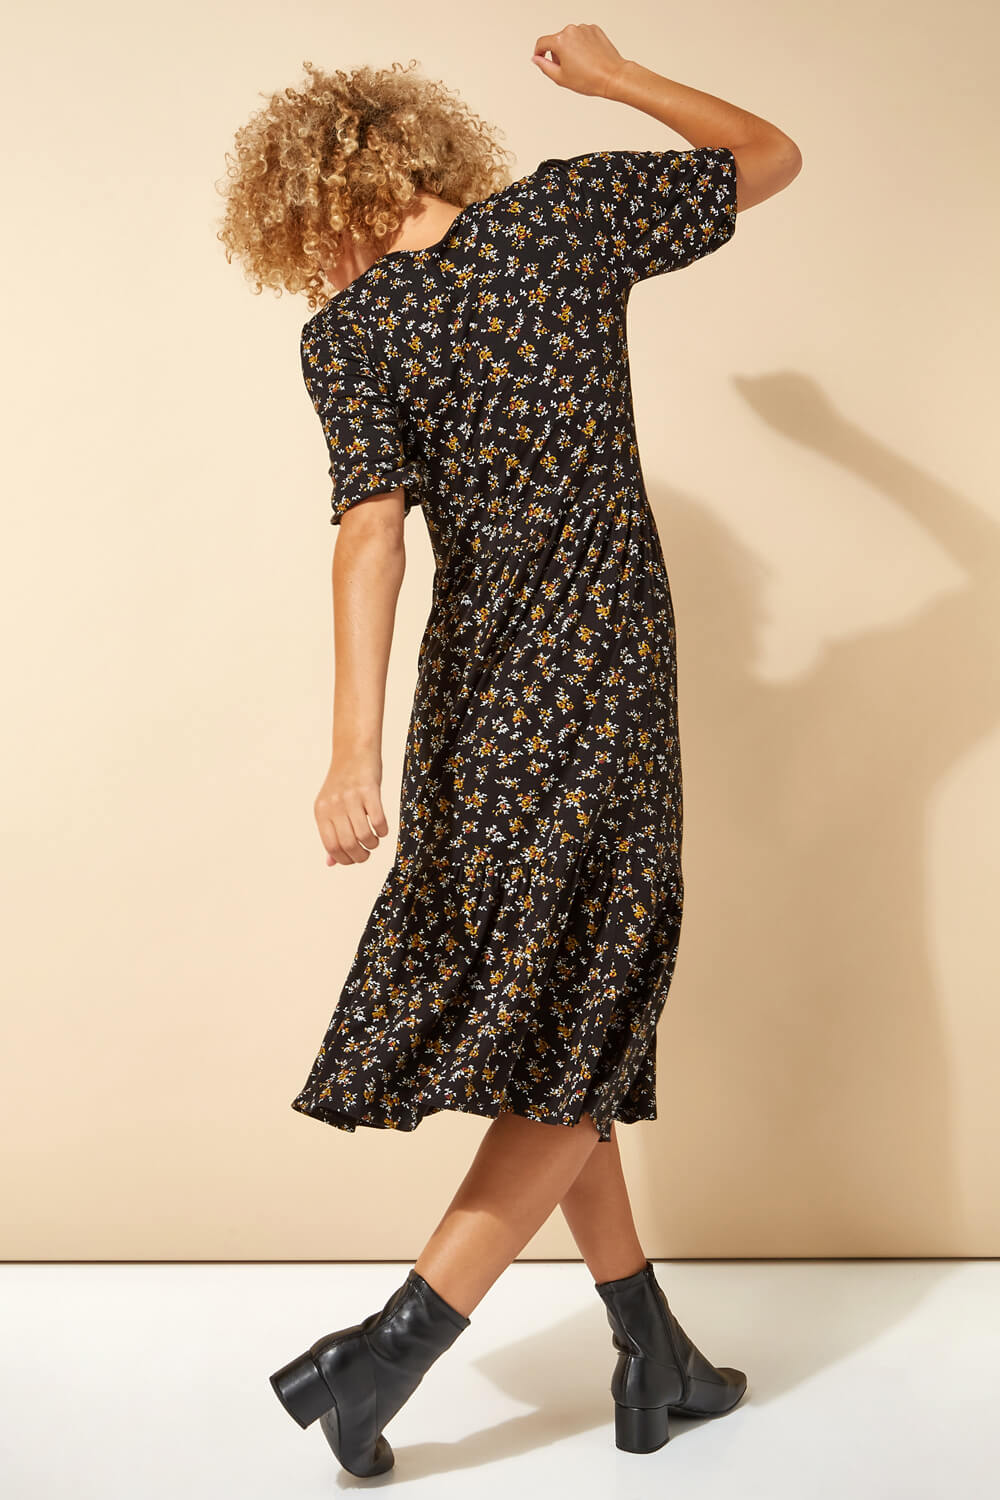 Black Ditsy Floral Tiered Midi Dress, Image 2 of 4